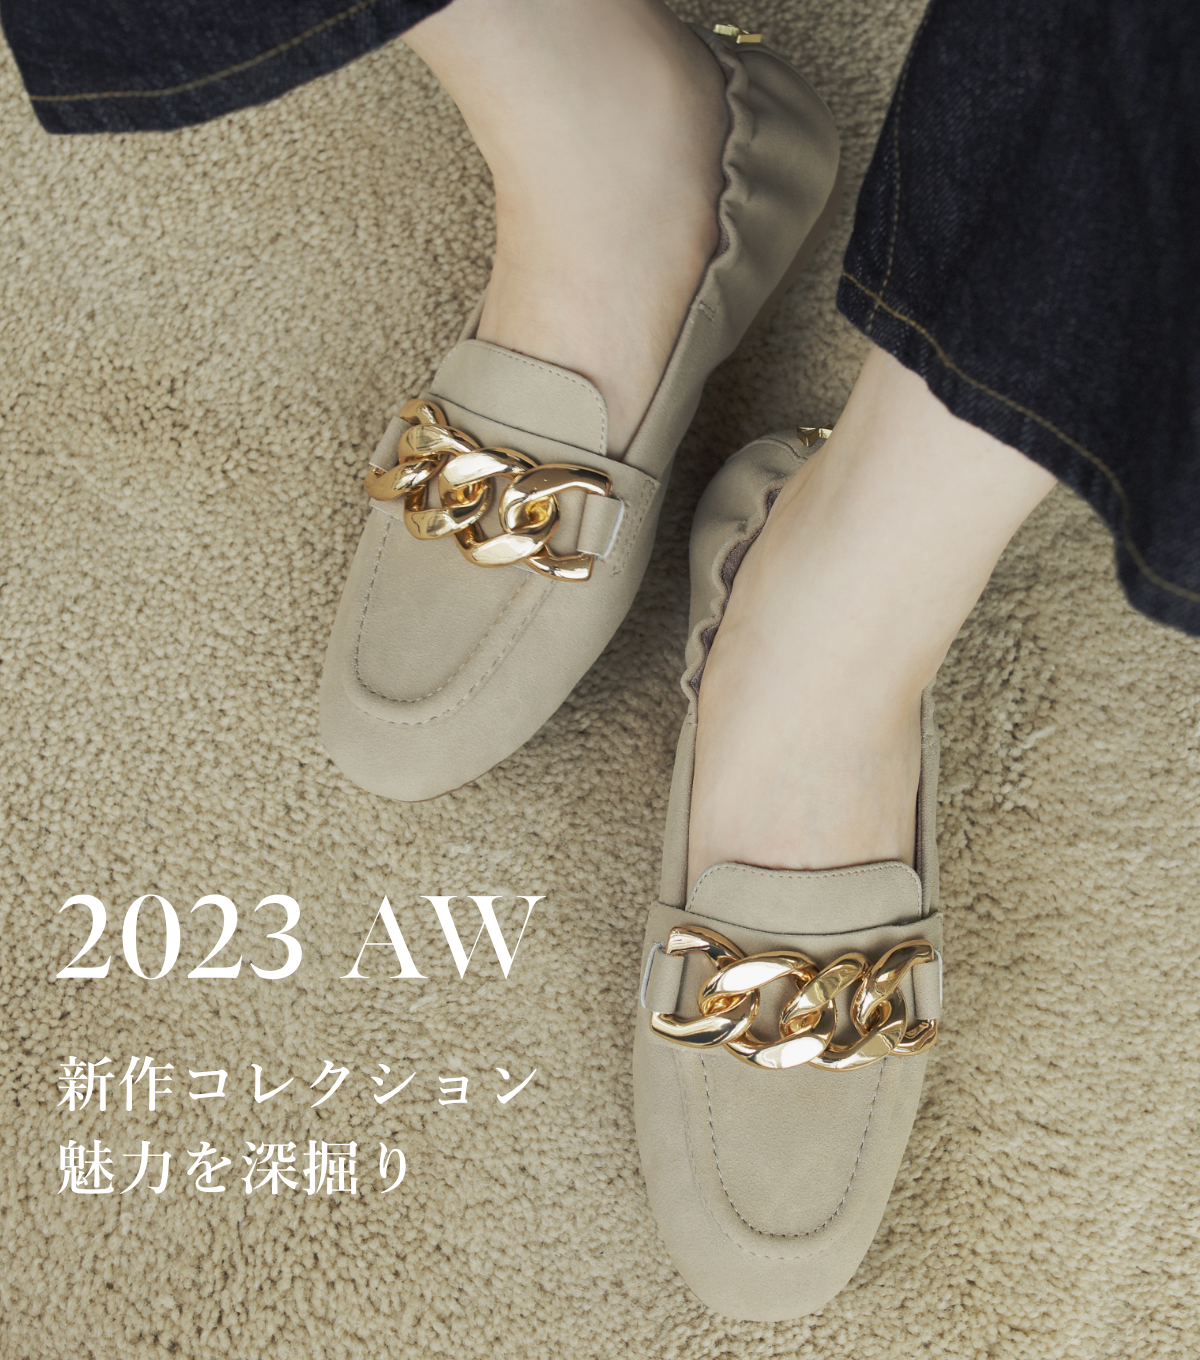 2023 AW collection<br>新作パンプスの魅力を深堀り